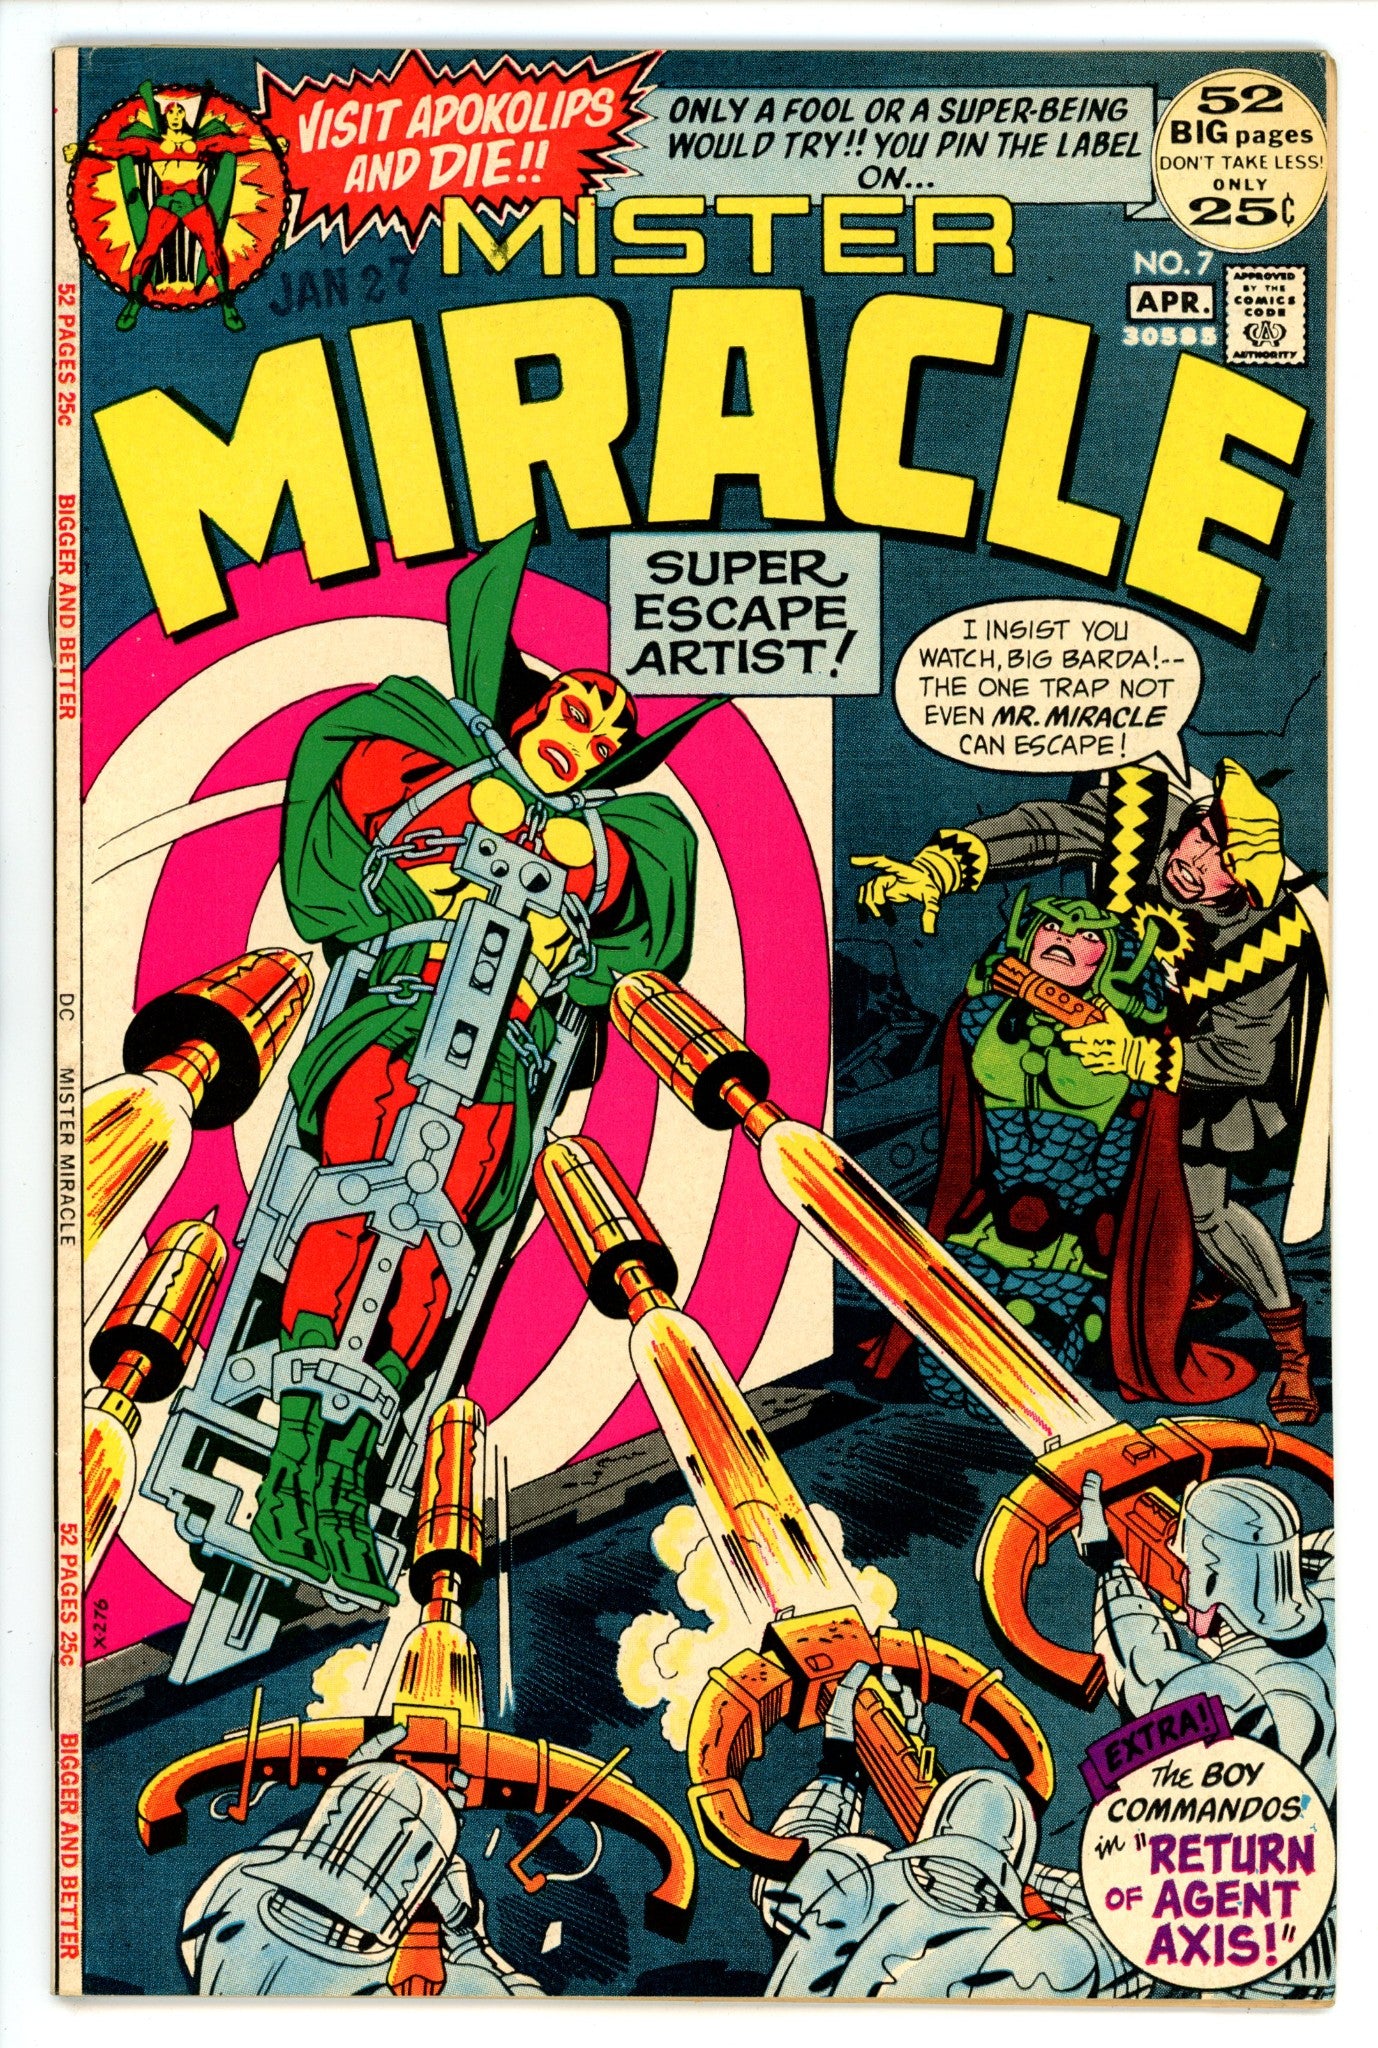 Mister Miracle Vol 1 7 VF- (7.5) (1972) 